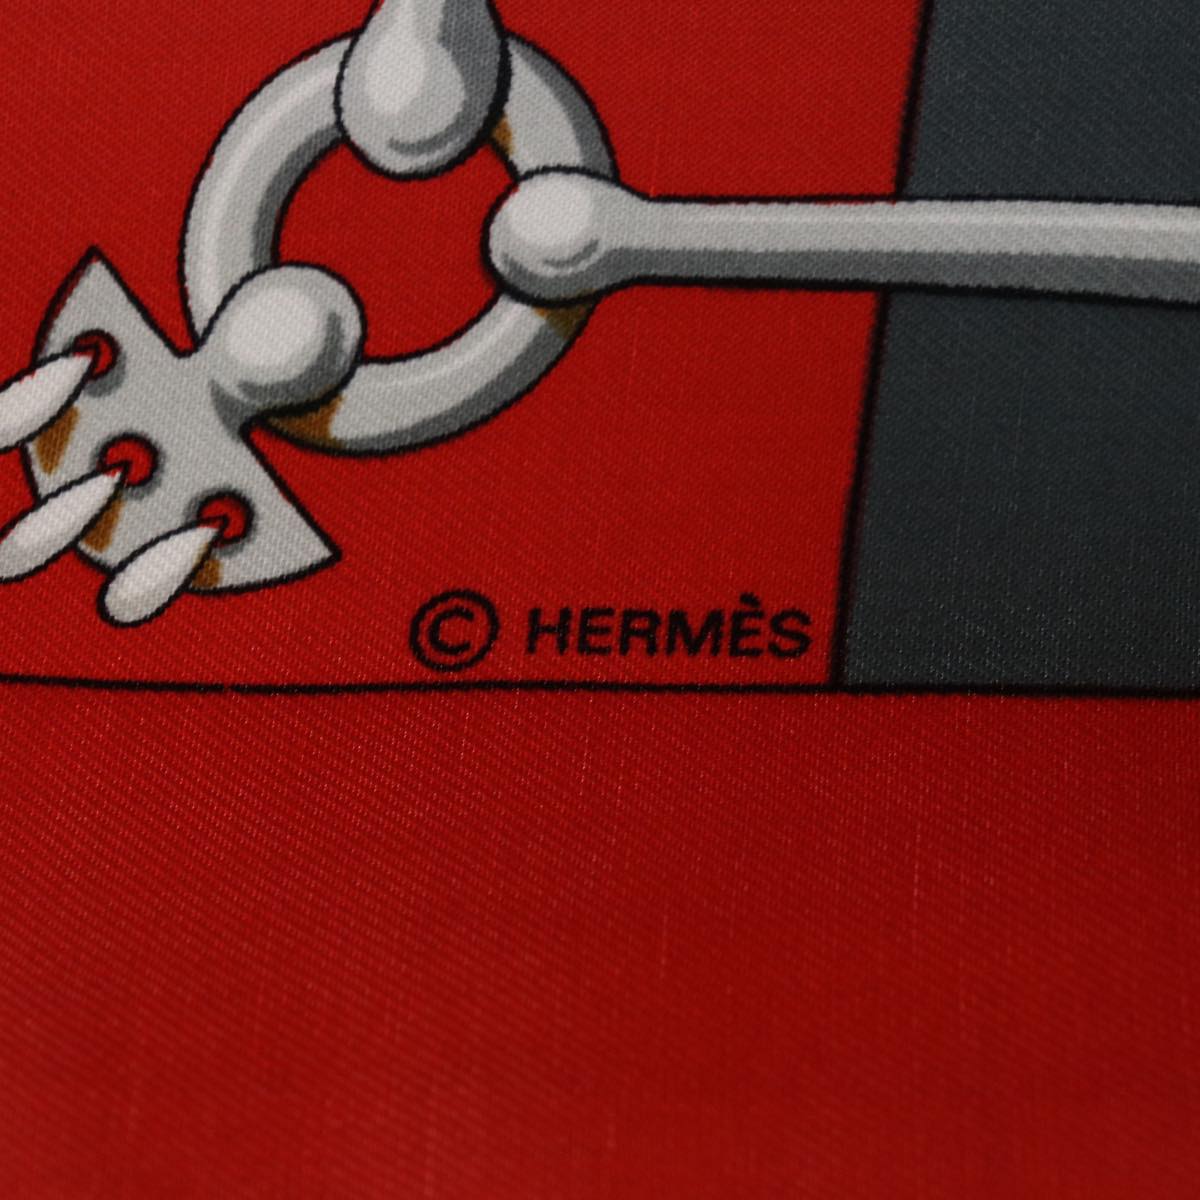 HERMES Carre 90 Cliquetis Scarf Silk Red Auth 64620